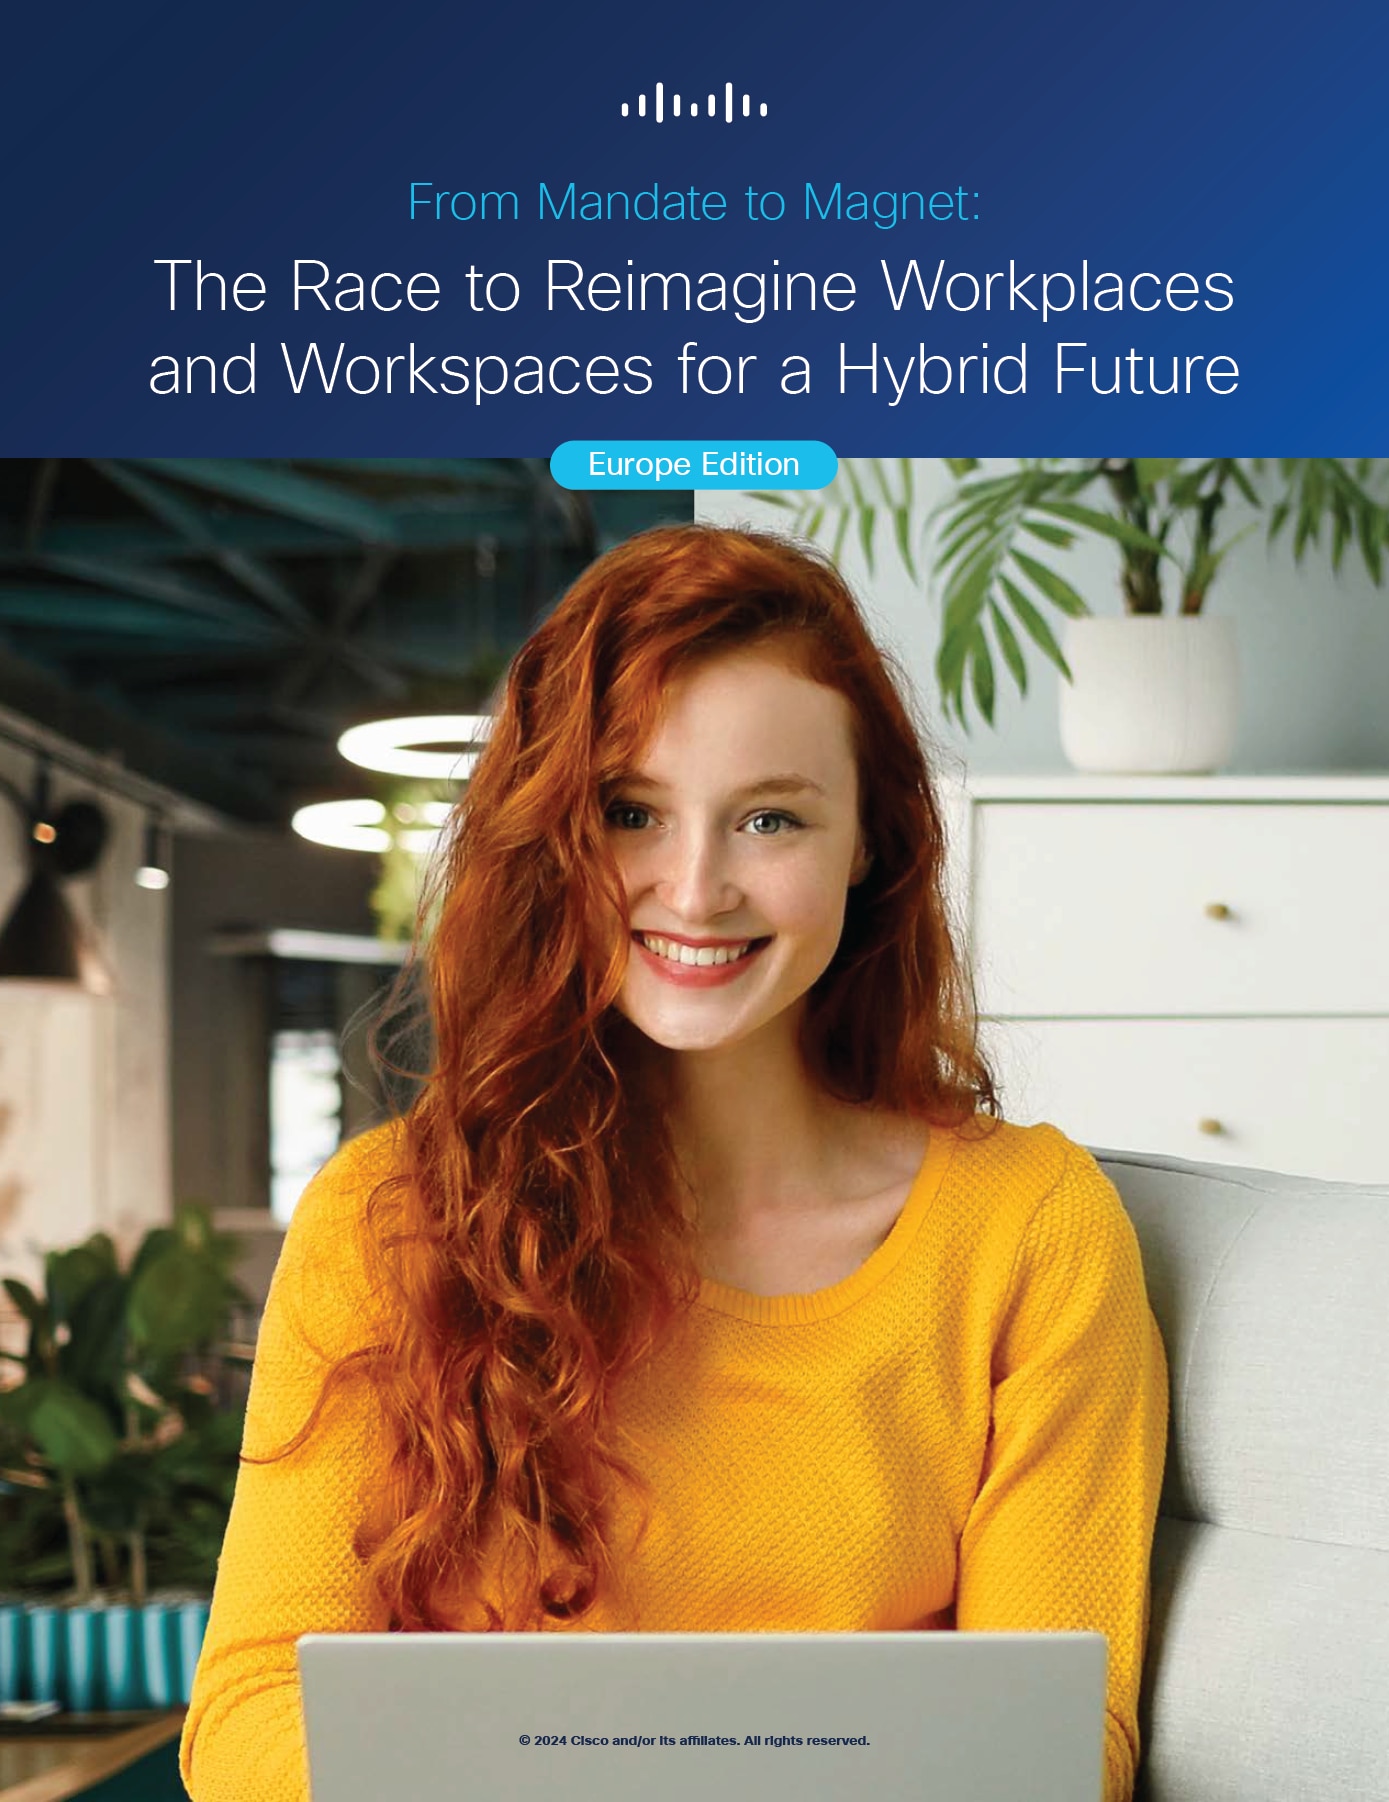 Cover of the research report, Reimagine Workplaces: Hybrid Work Research in Europe.